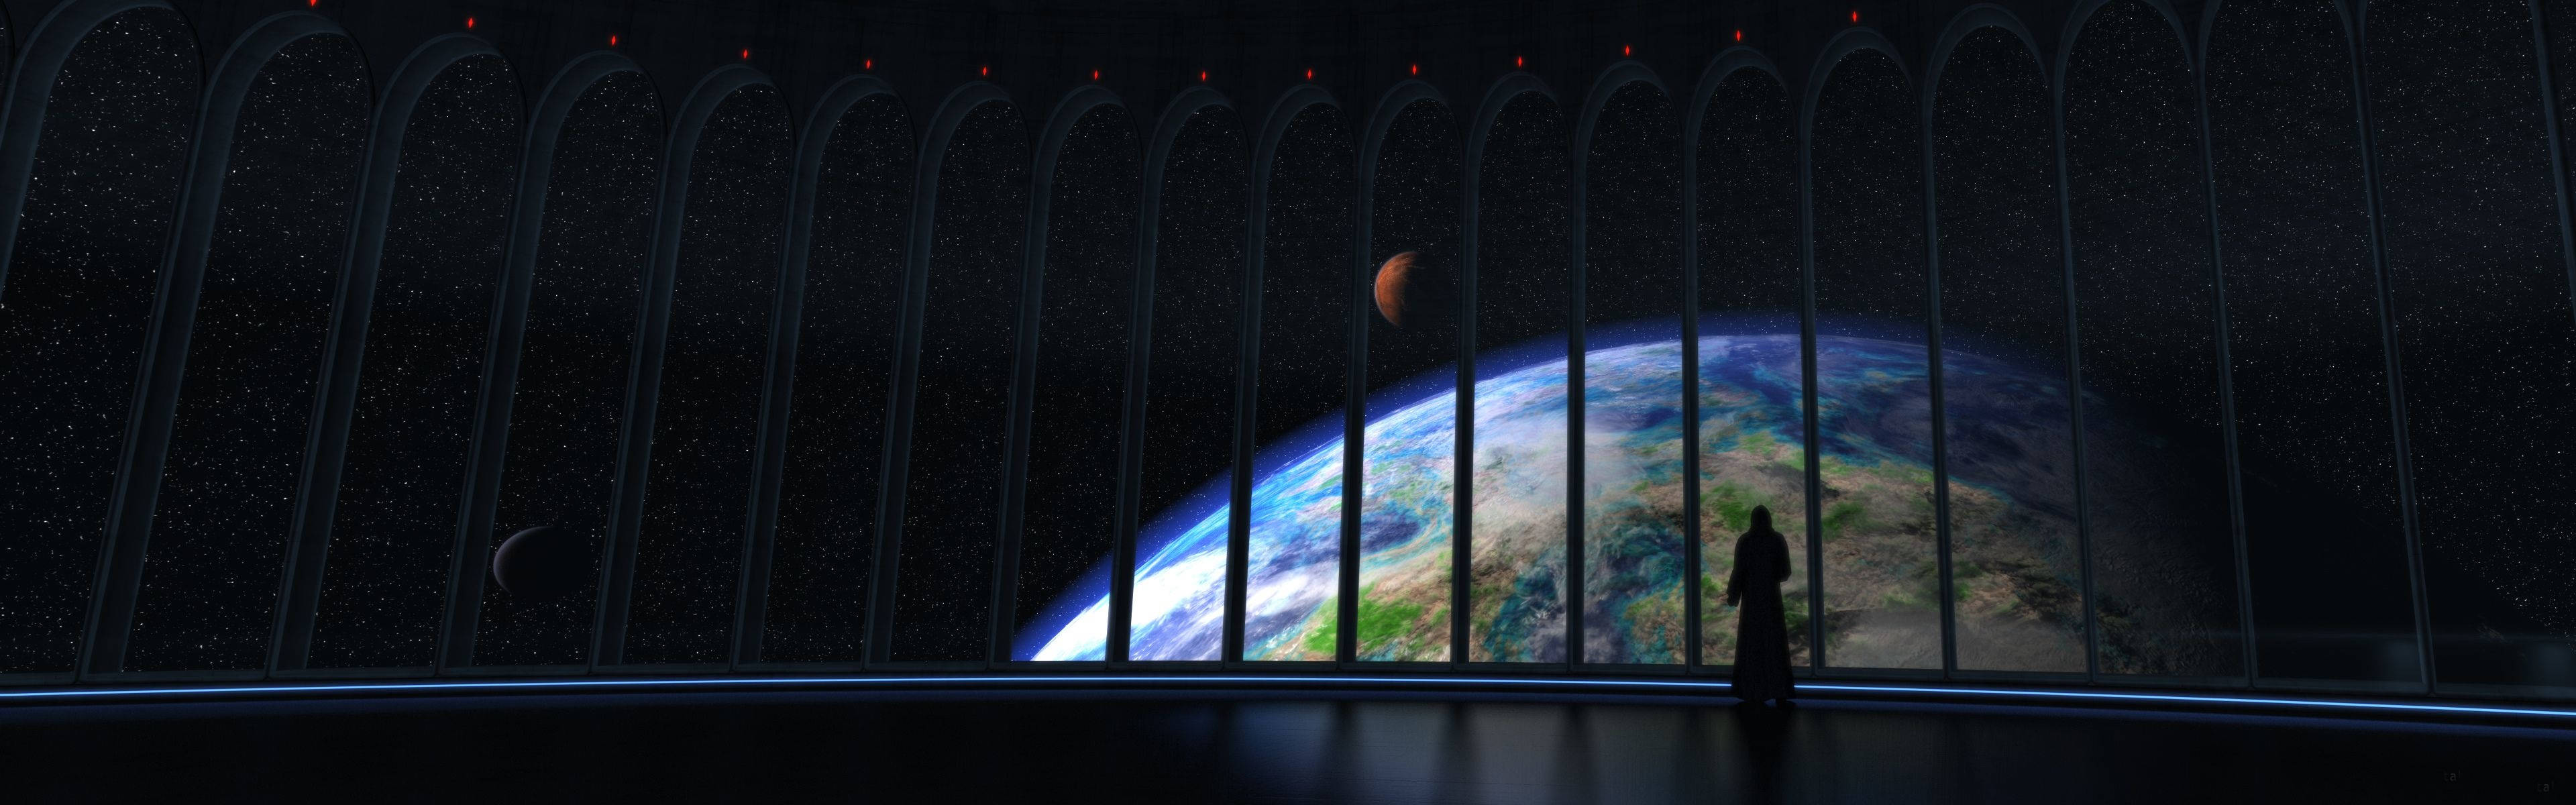 Man Overseeing Earth For Desktop Monitor Wallpaper